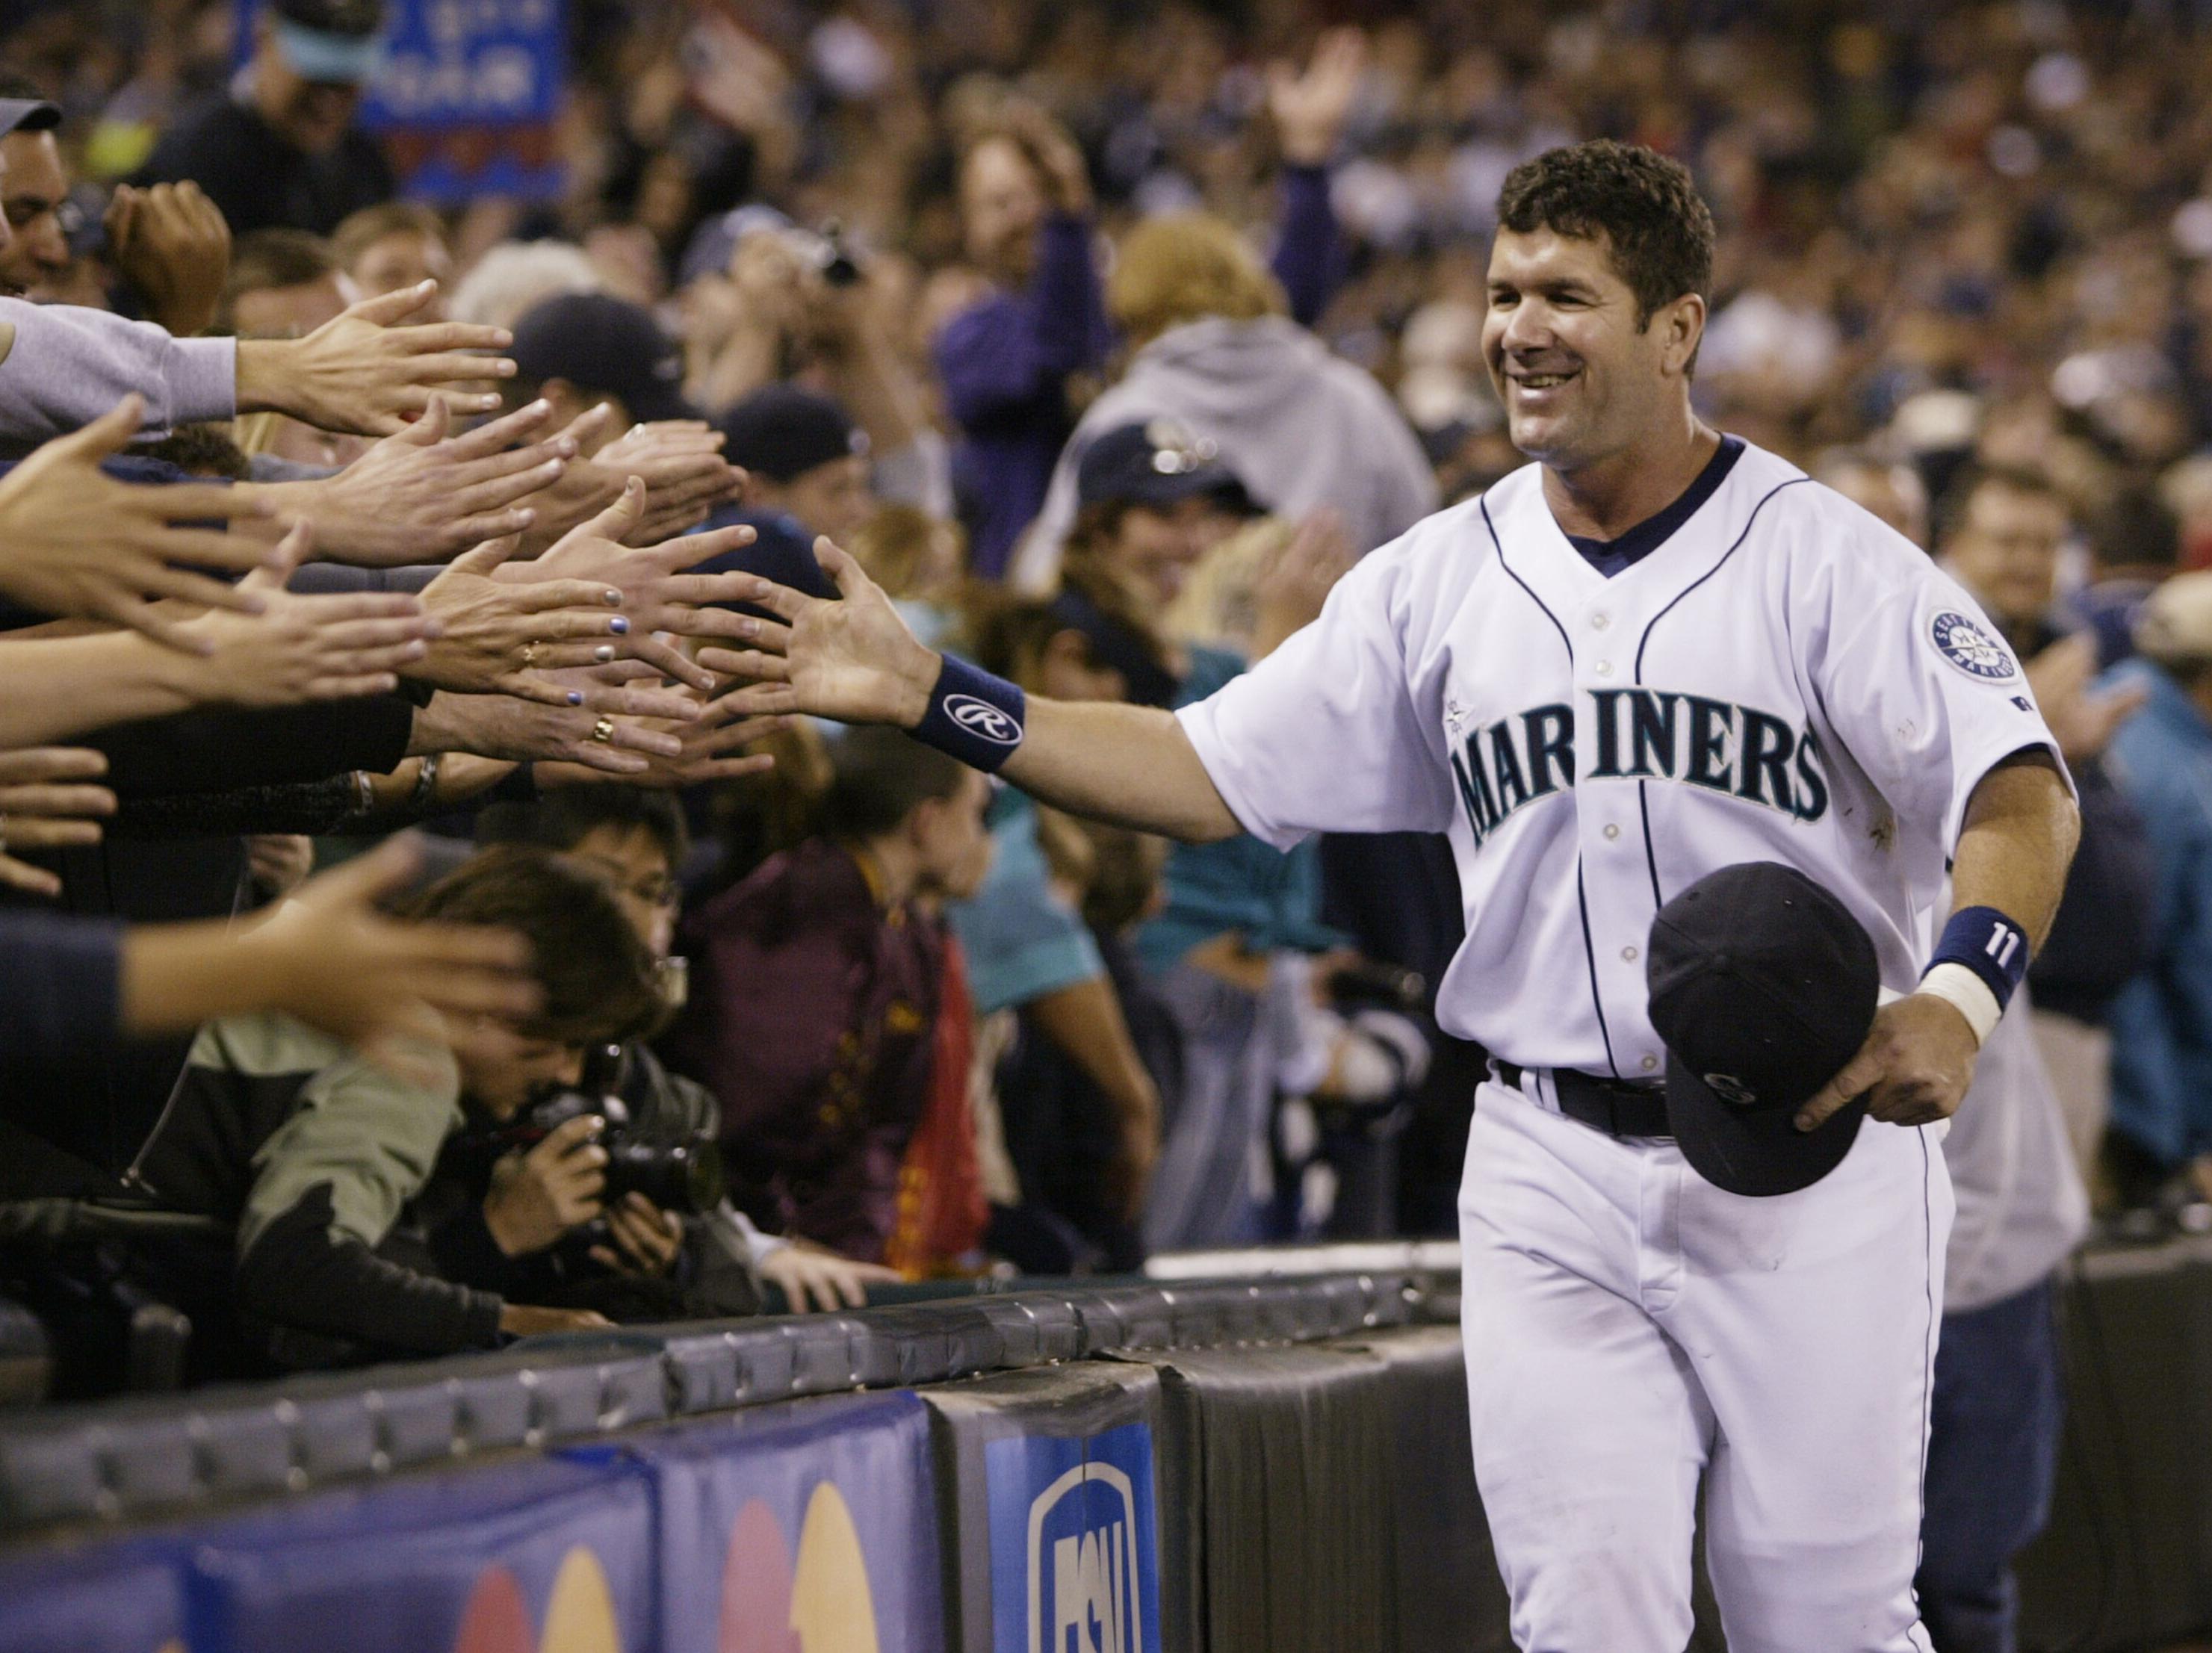 Edgar Martinez: 5 things to know about baseball's new Hall of Famer